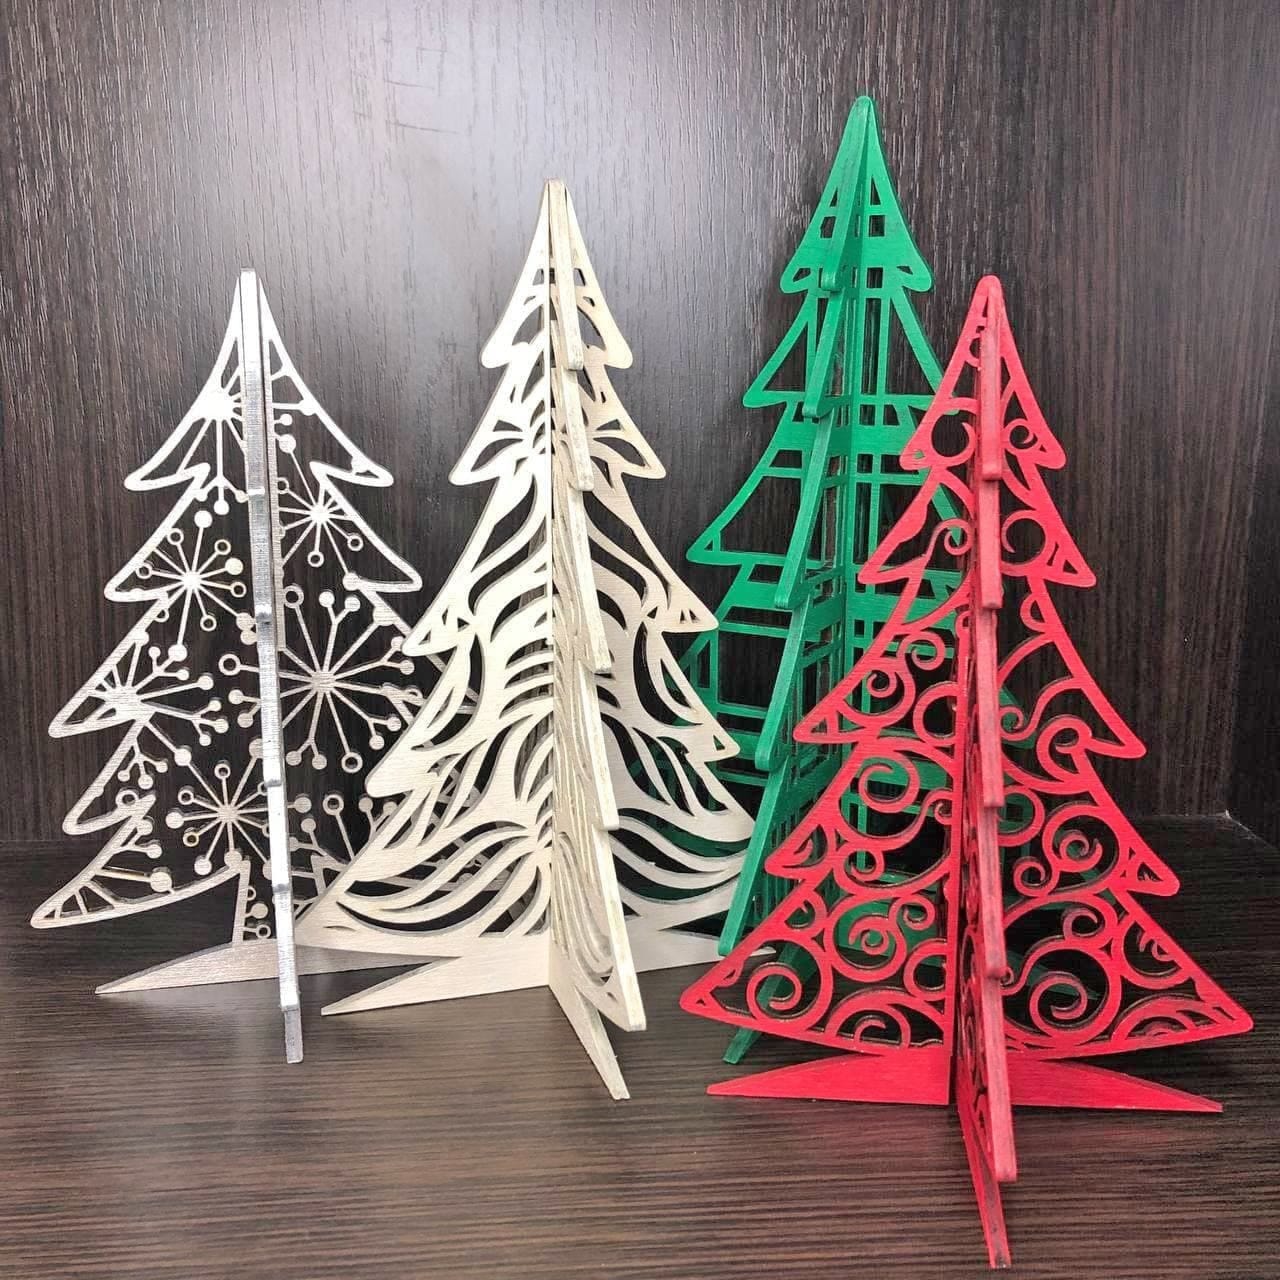 3D Snowflake Standing Trees Set of 10 SVG files Glowforge of Laser,Christmas tree svg,